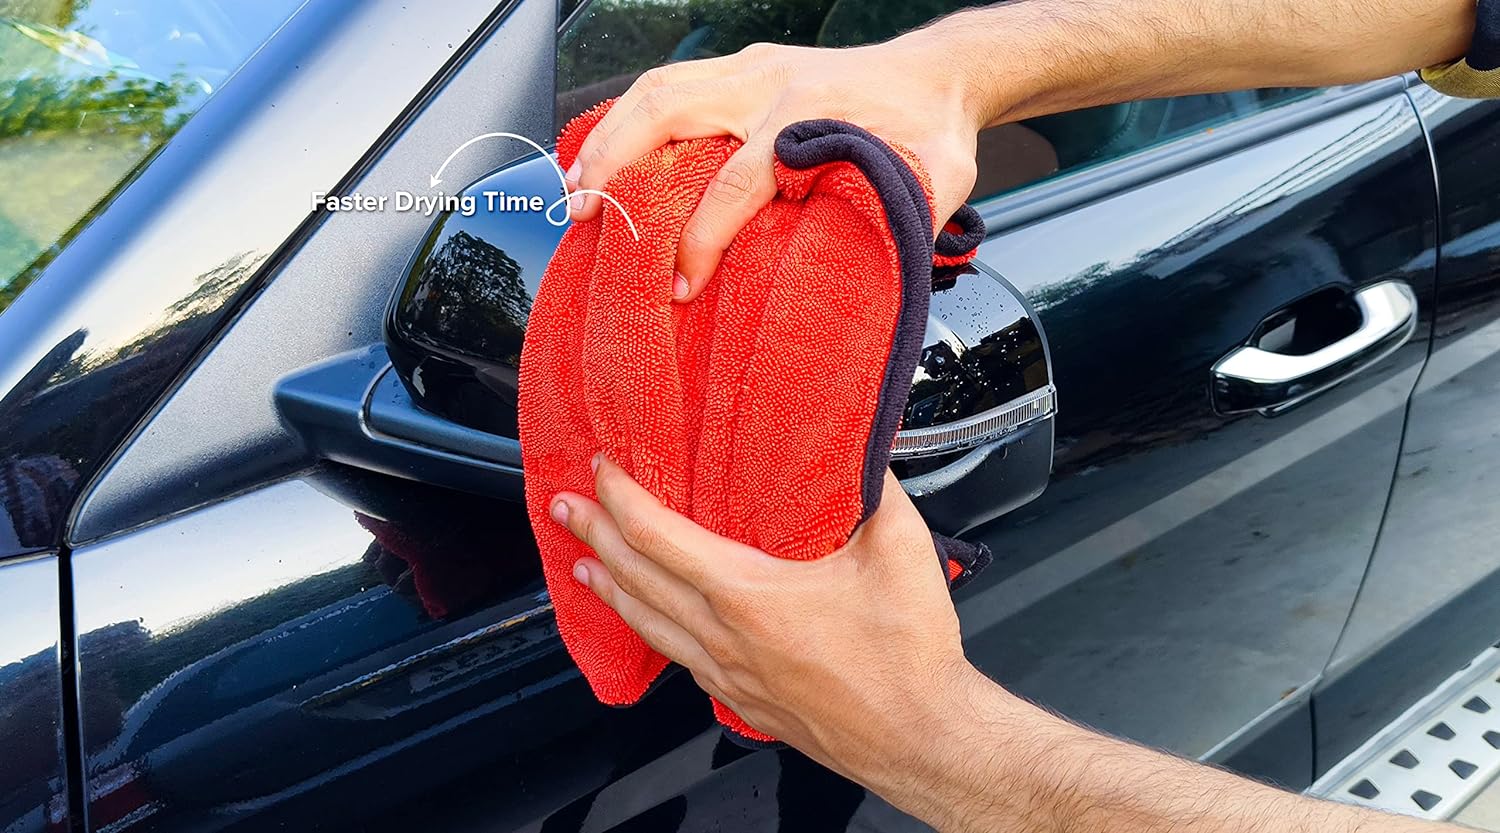 SOFTSPUN Microfiber Cloth for Car - 800 GSM, Aqua Blue Twisted Loop Super Absorbent Towel - Edgeless Design with Plush Pile and Lint Free Cloth for Drying and Detailing.